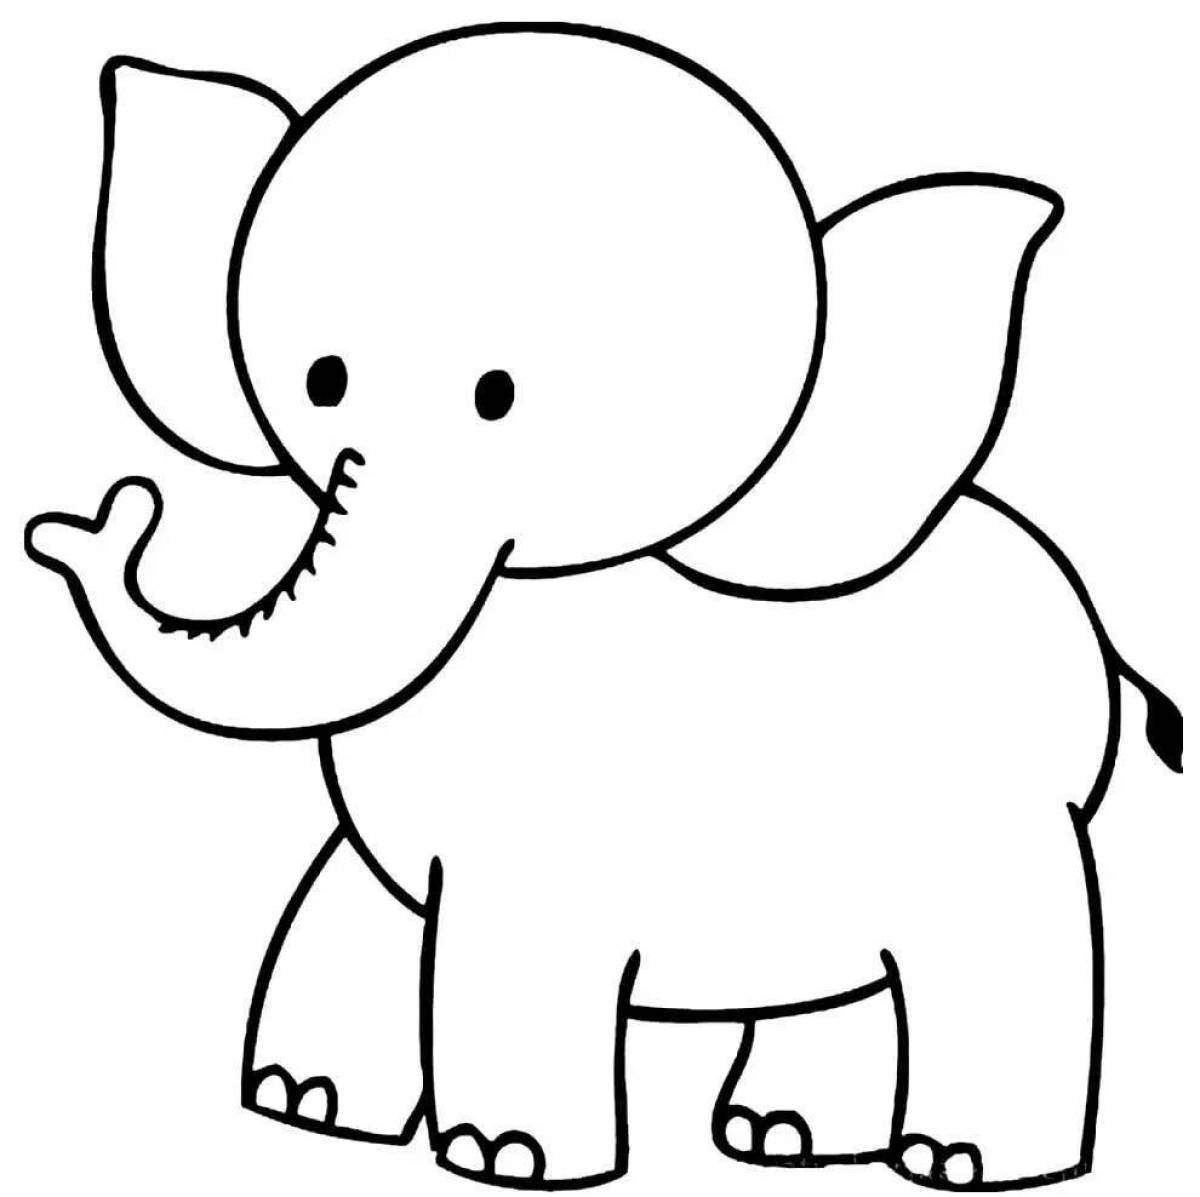 Wonderful elephant coloring for children 3-4 years old